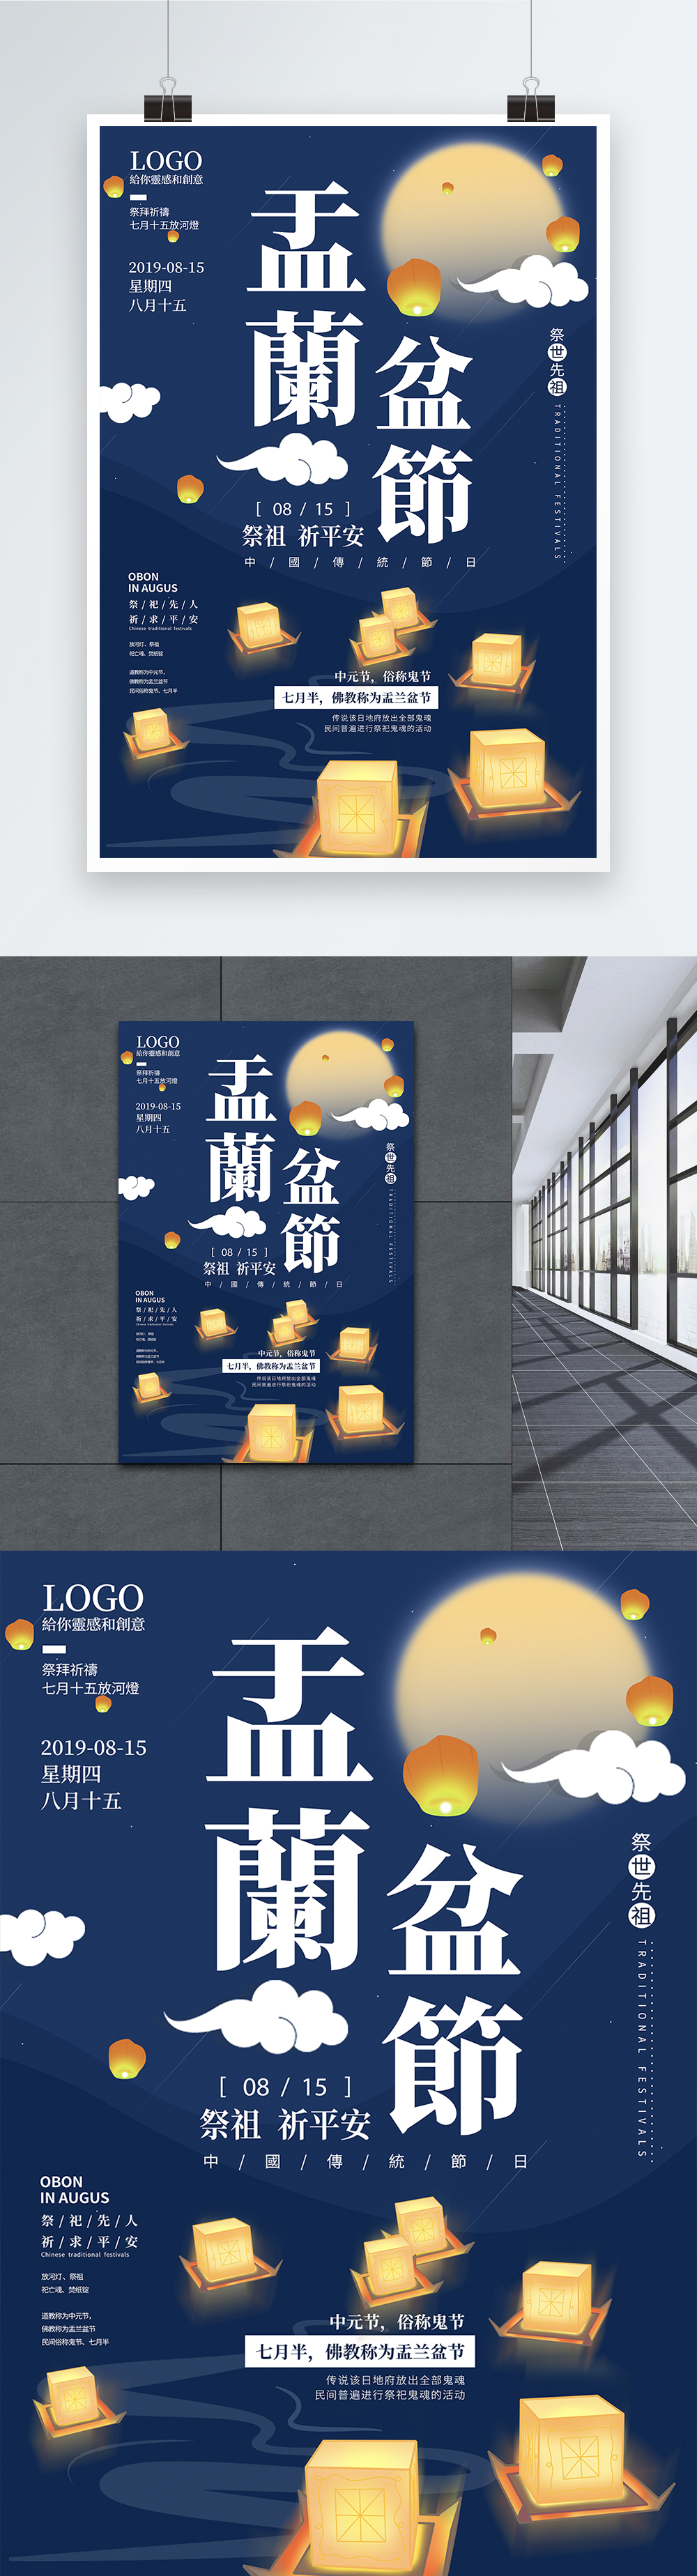 Posters for the bon festival template image_picture free download